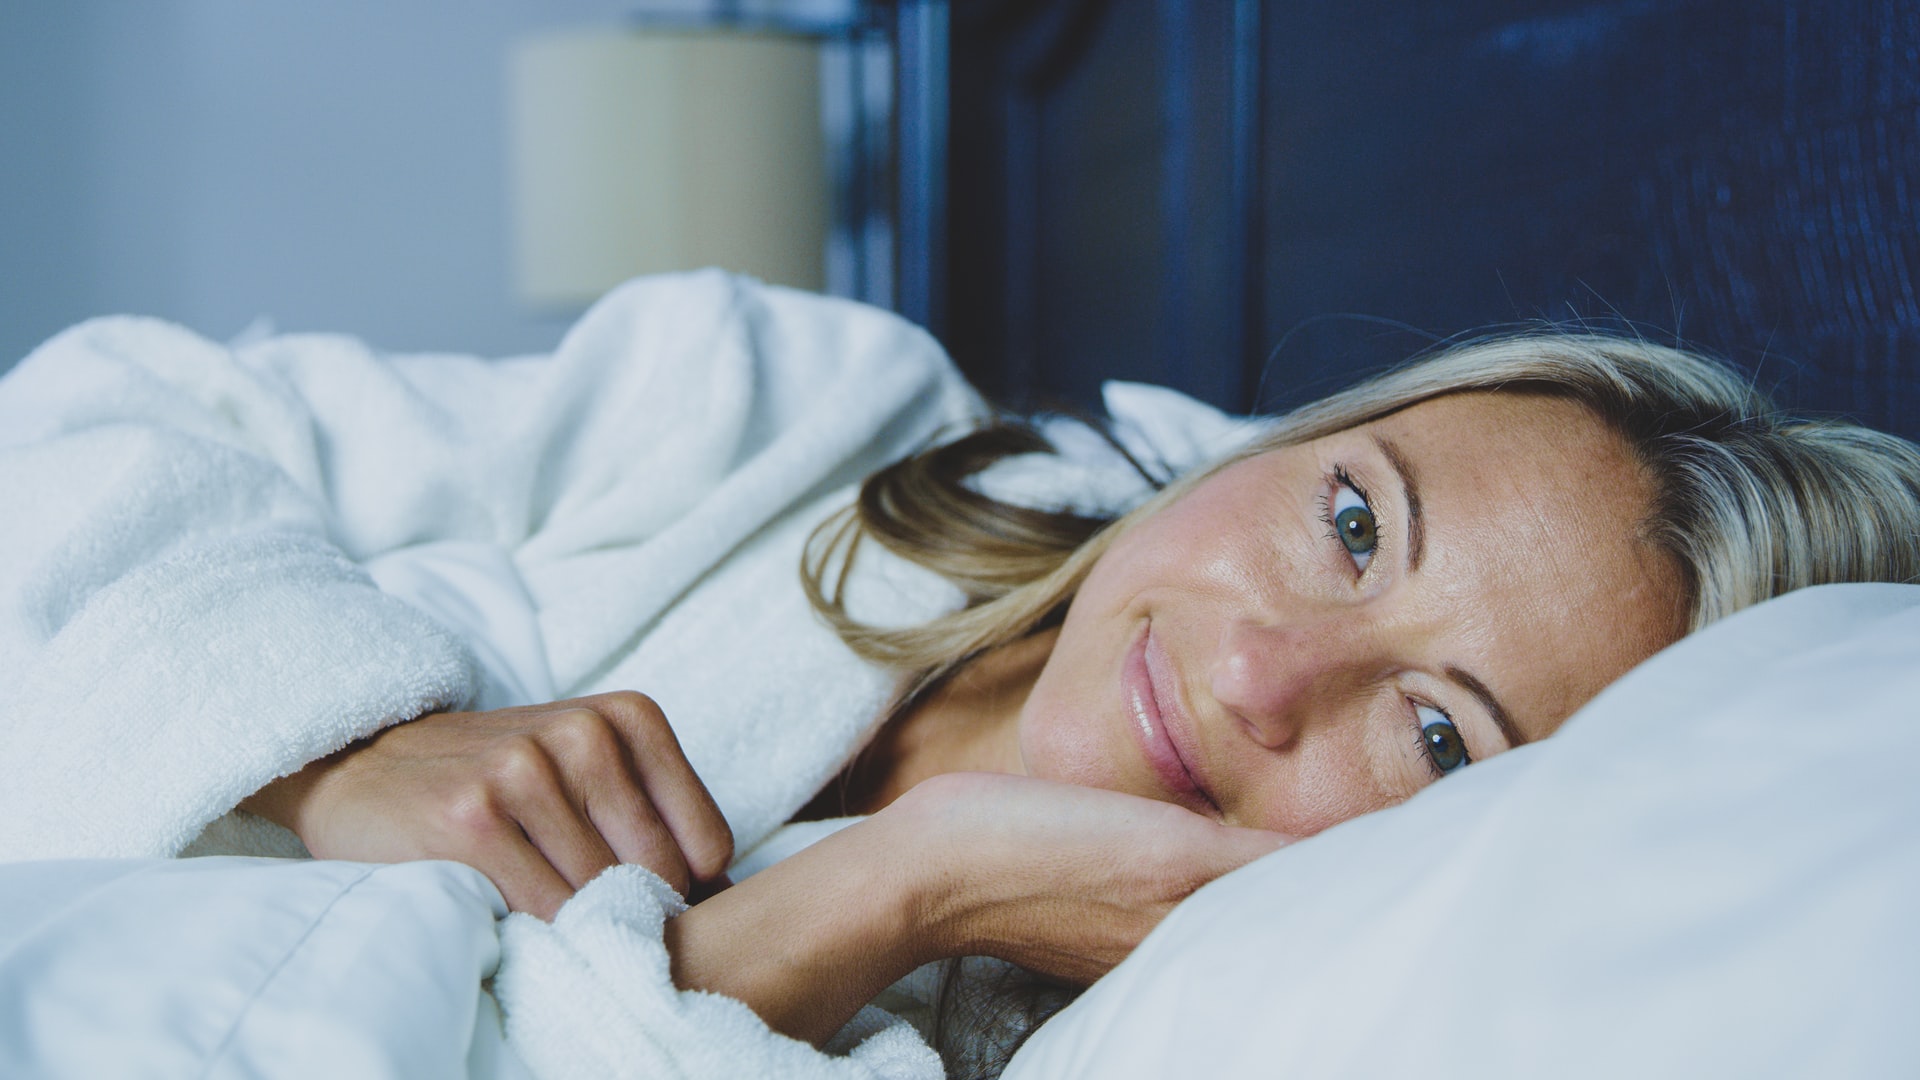 How important is sleep for your overall health?